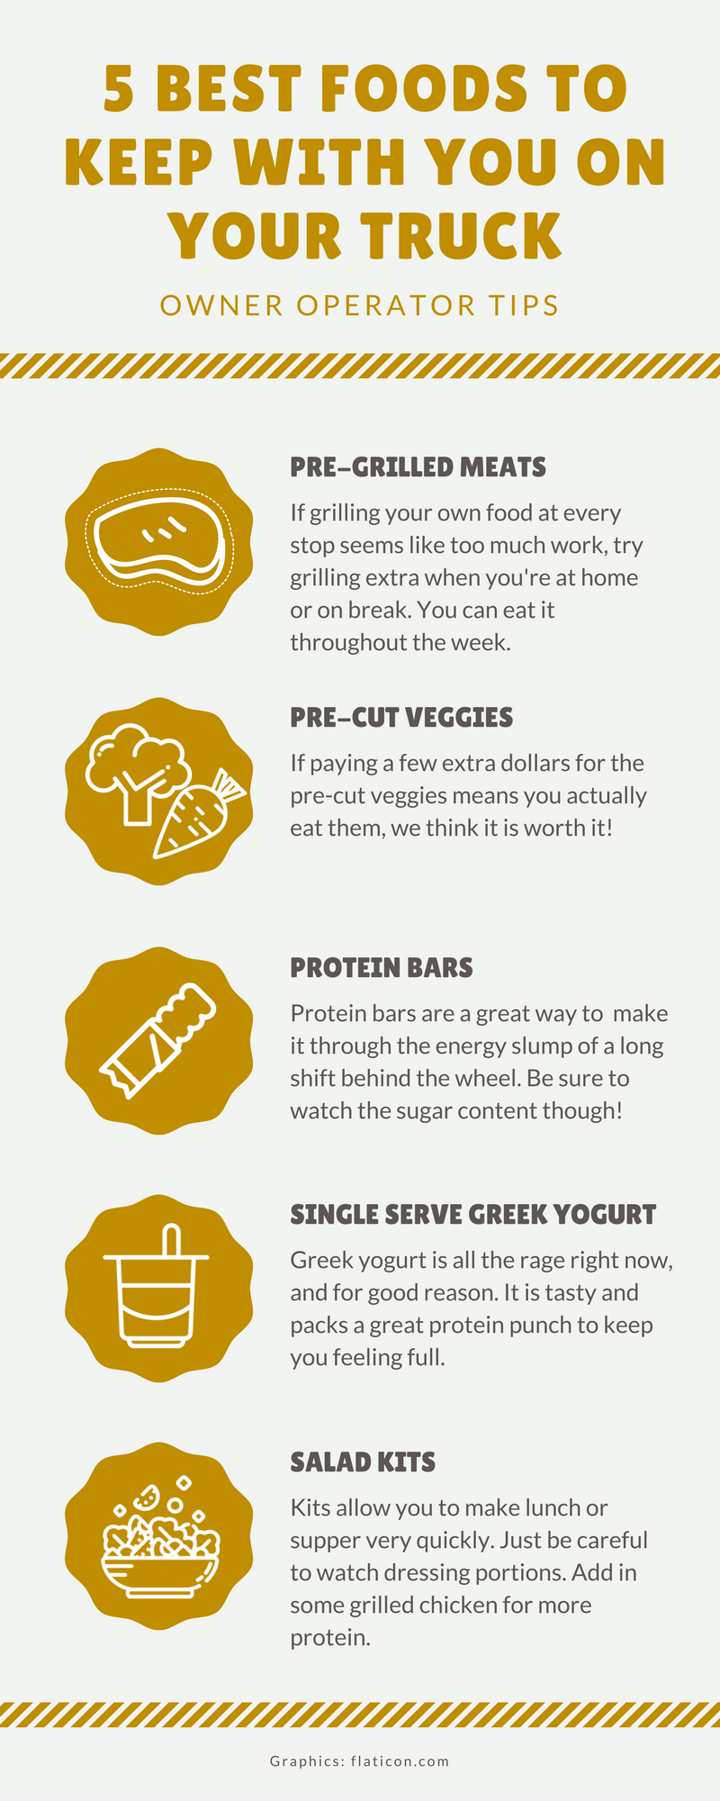 5 Best Foods to Keep With You On Your Truck.png